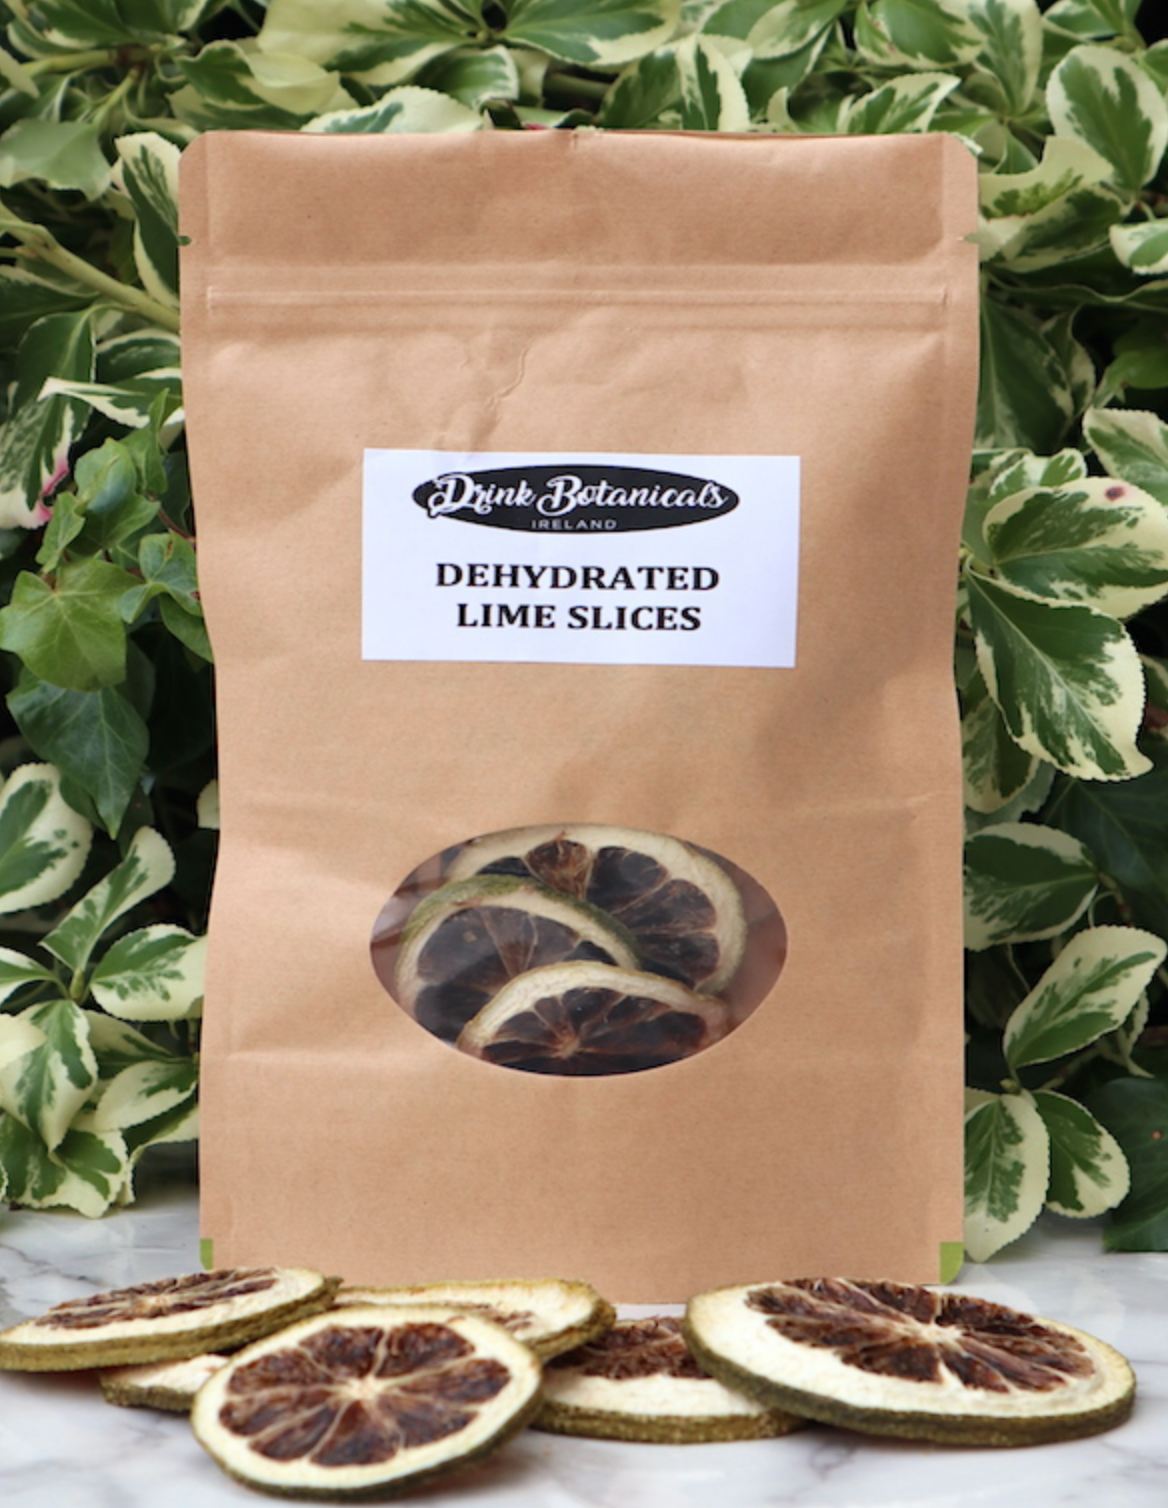 Drink Botanicals - Dehydrated Lime Slices Martins iff licence